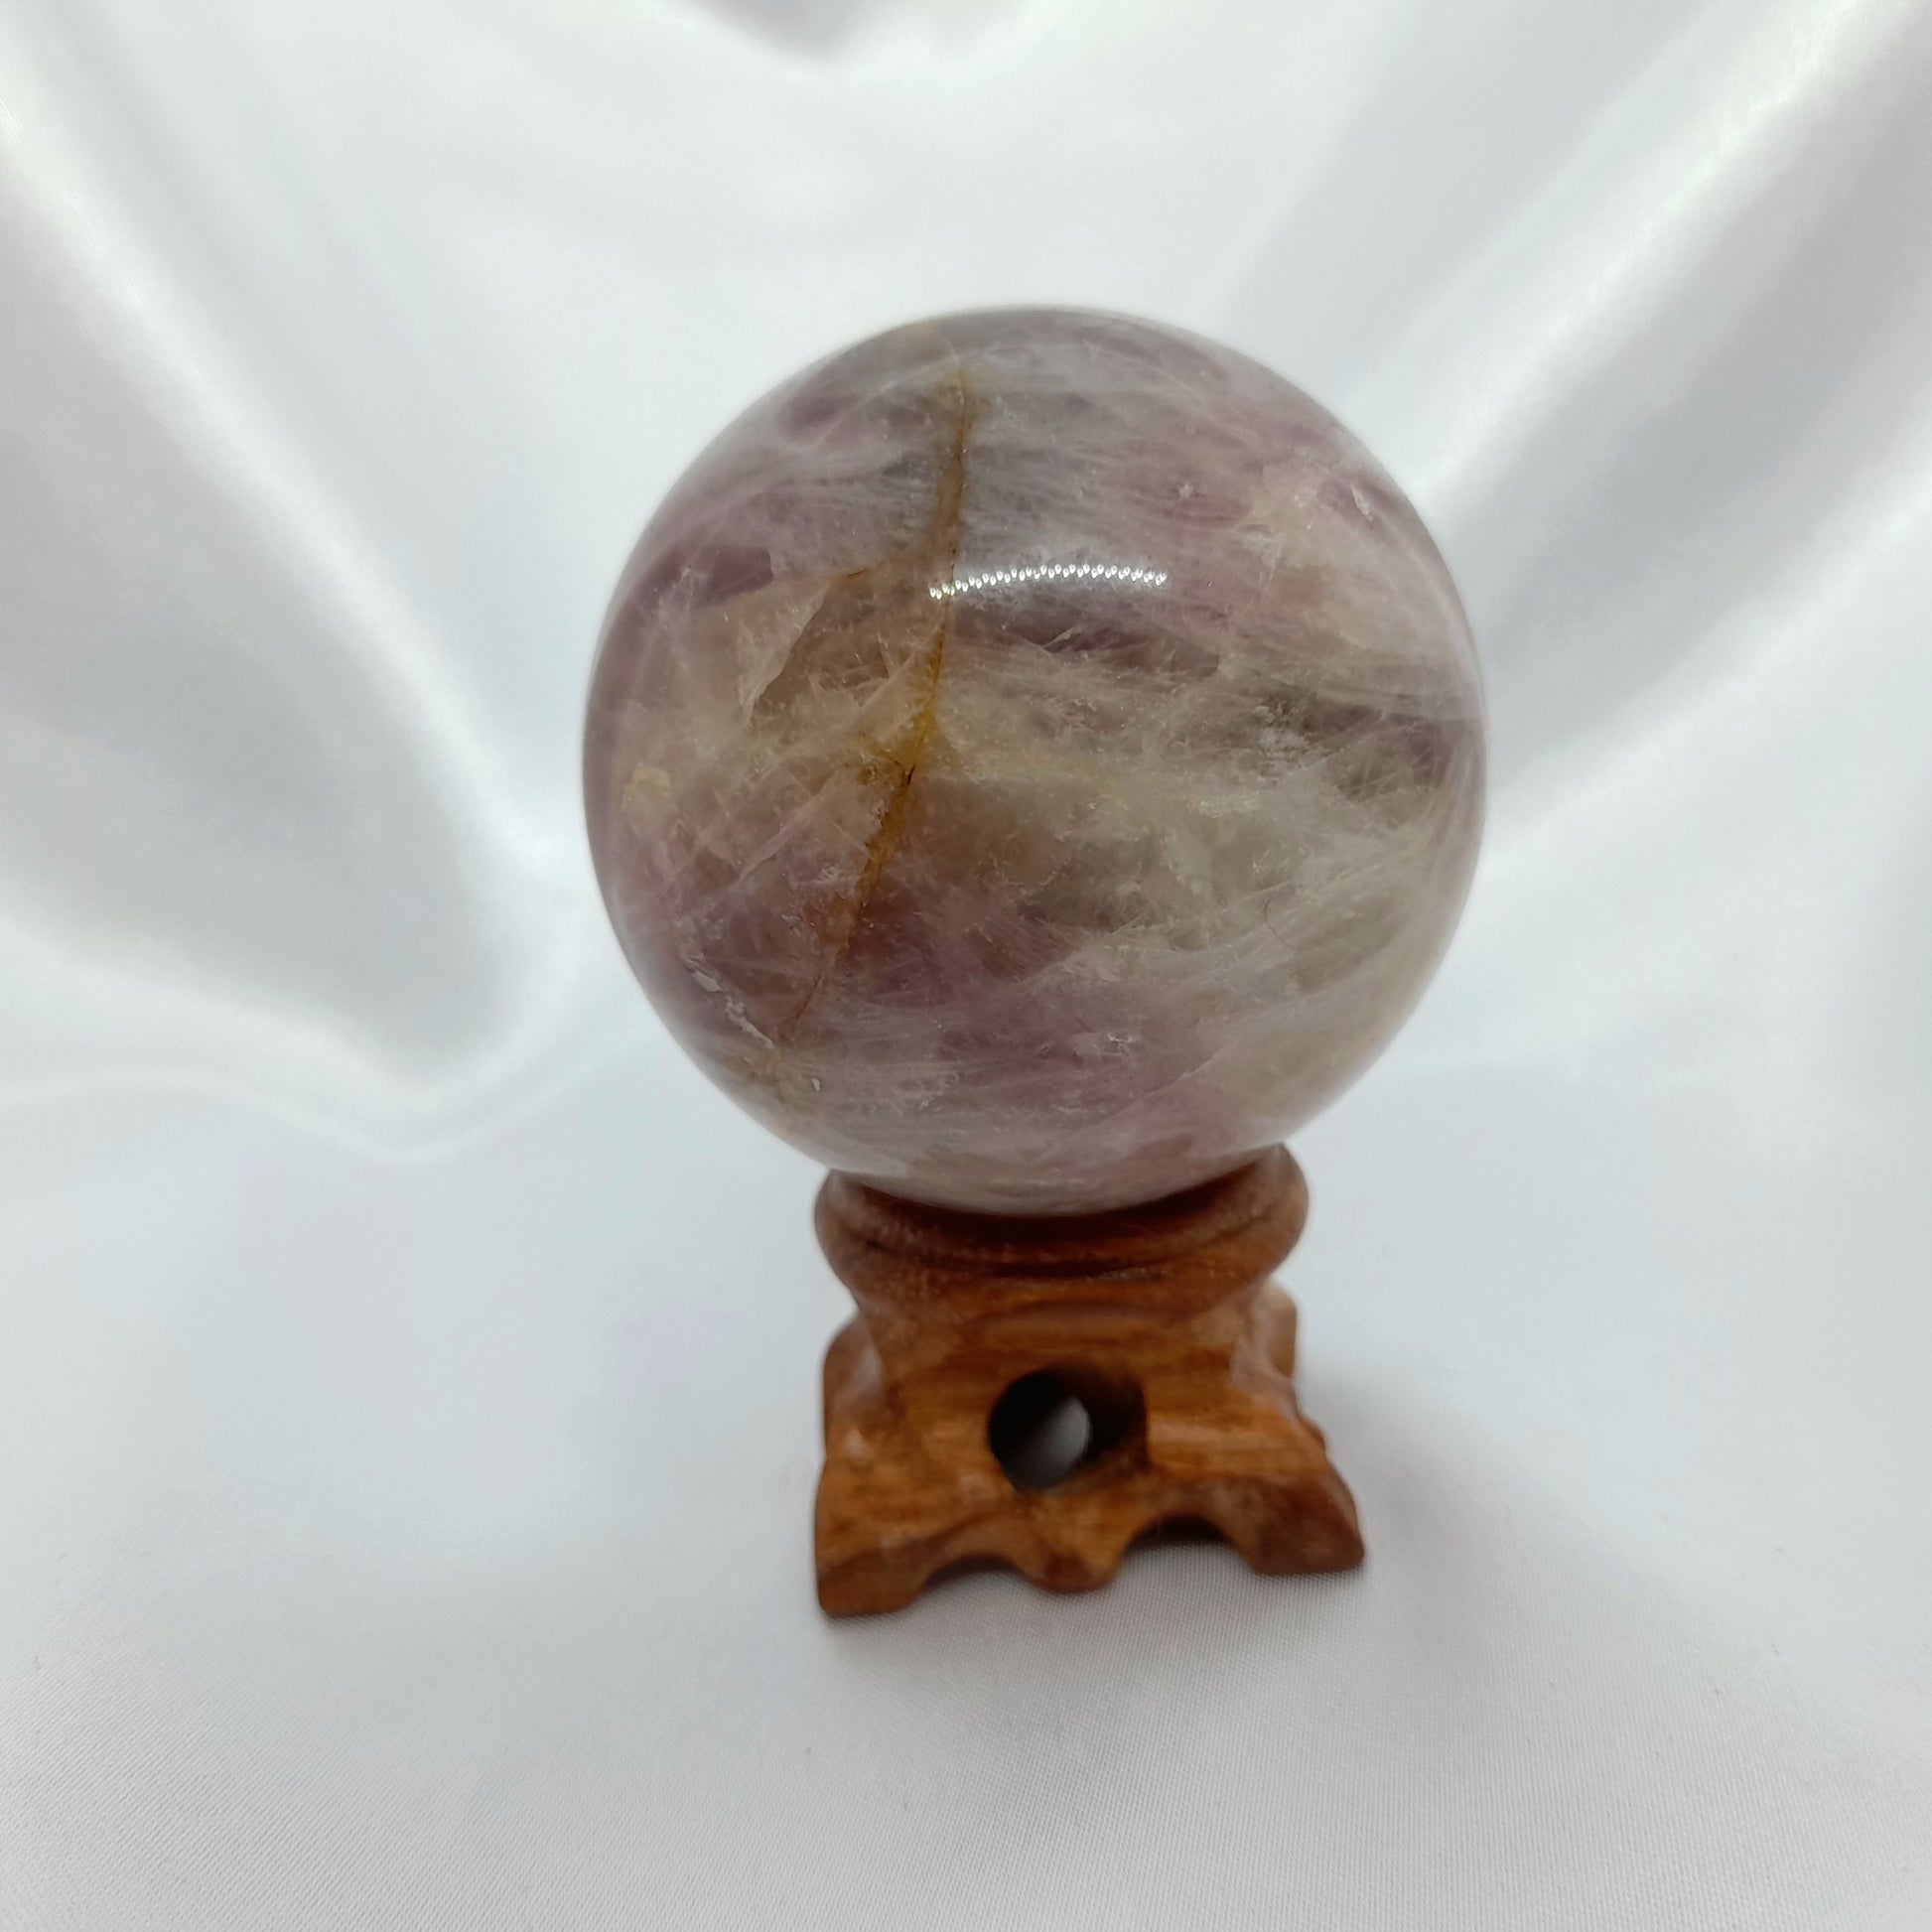 Lavender Rose Quartz Sphere: A healing crystal and the stone of unconditional love. This captivating sphere, weighing roughly 260g and measuring approximately 6cm in diameter, radiates strong vibrations of love. Please note, spheres do not come with stands.